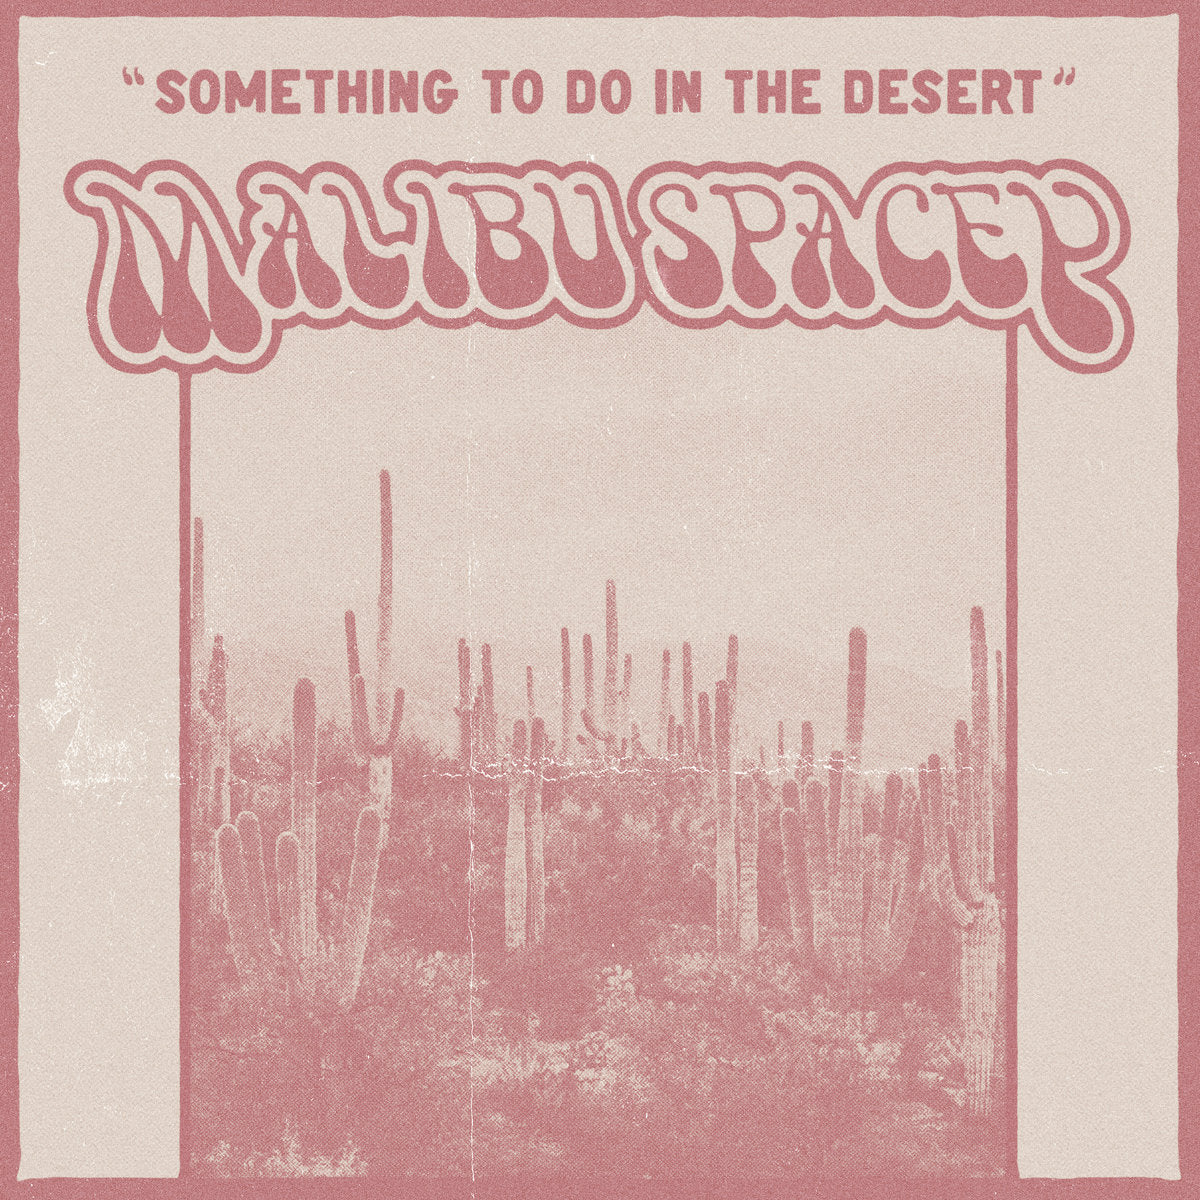 Malibu Spacey - Something To Do In The Desert